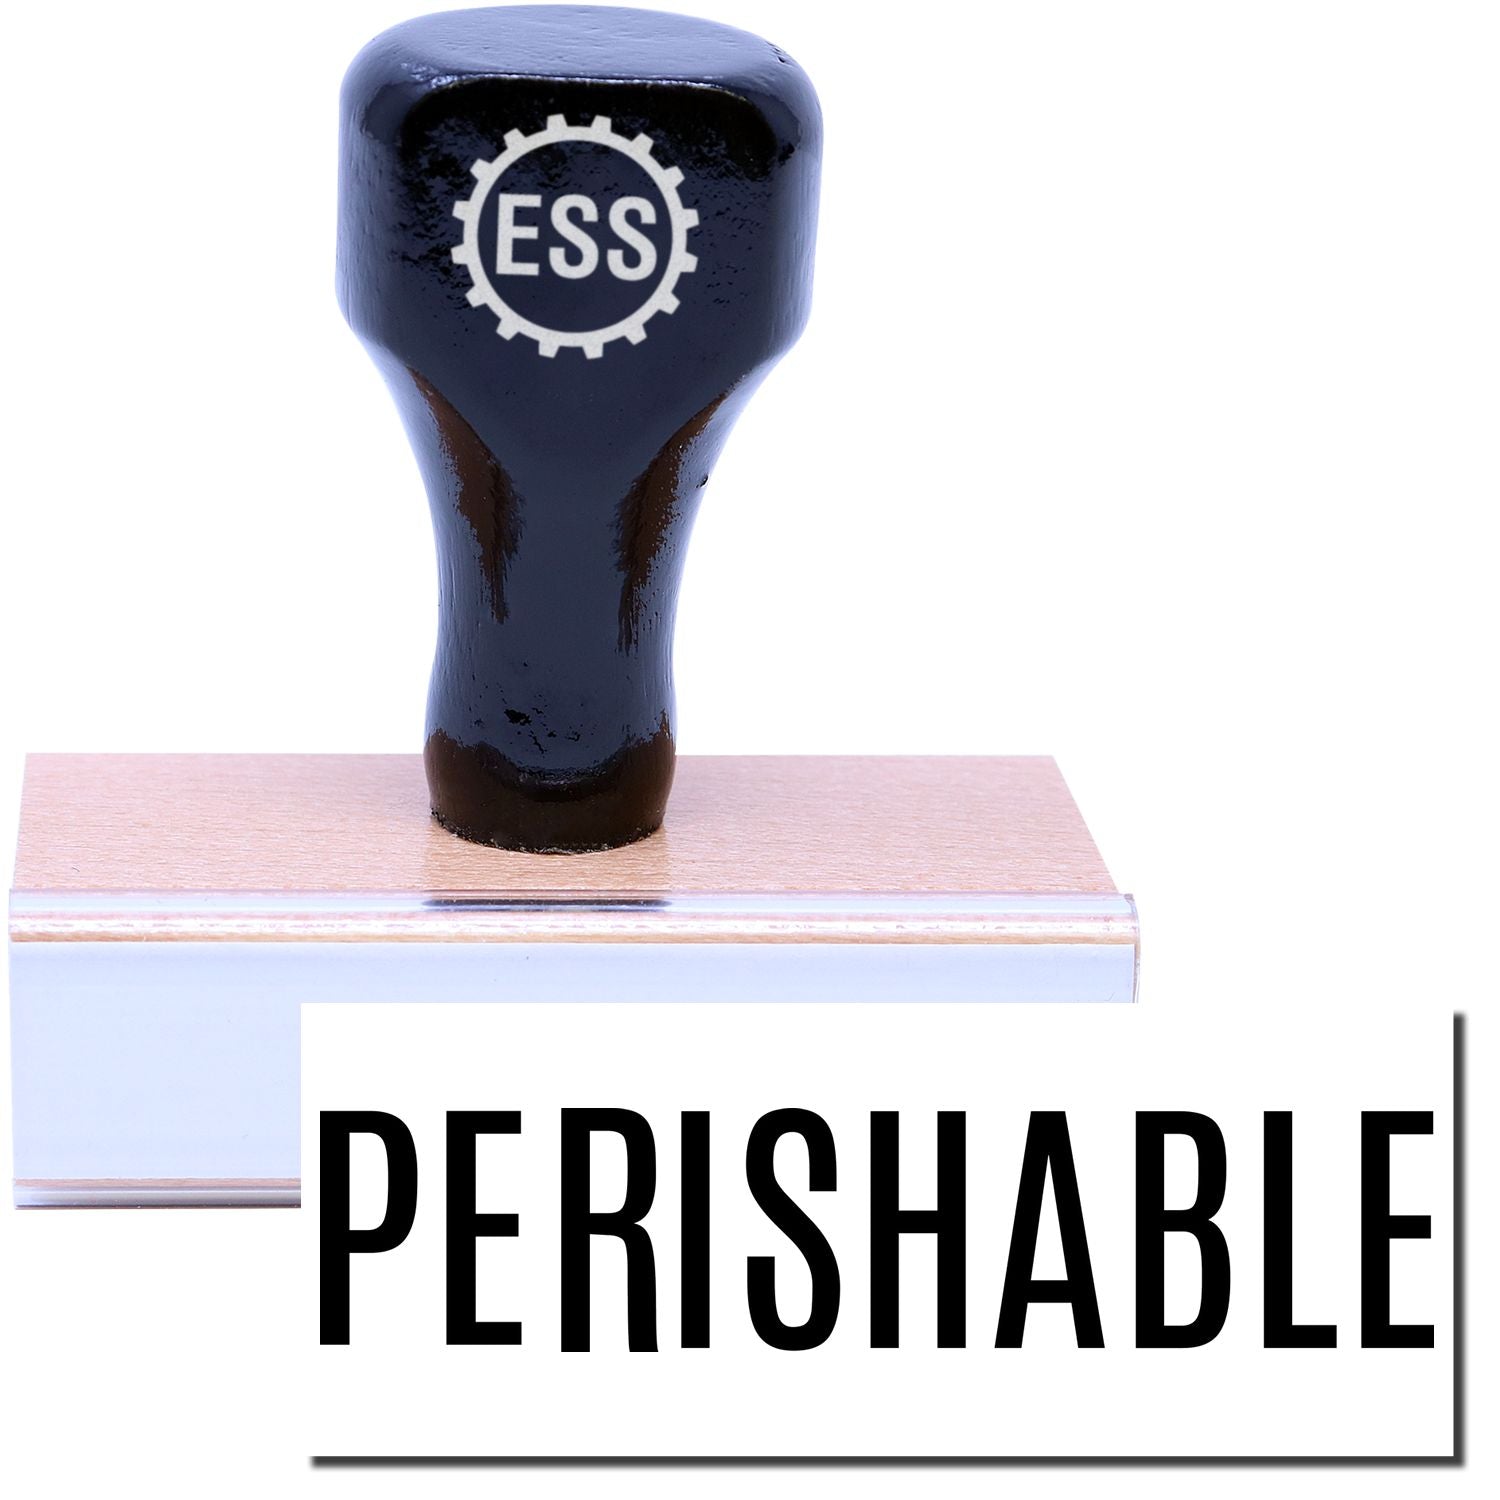 A stock office rubber stamp with a stamped image showing how the text "PERISHABLE" is displayed after stamping.